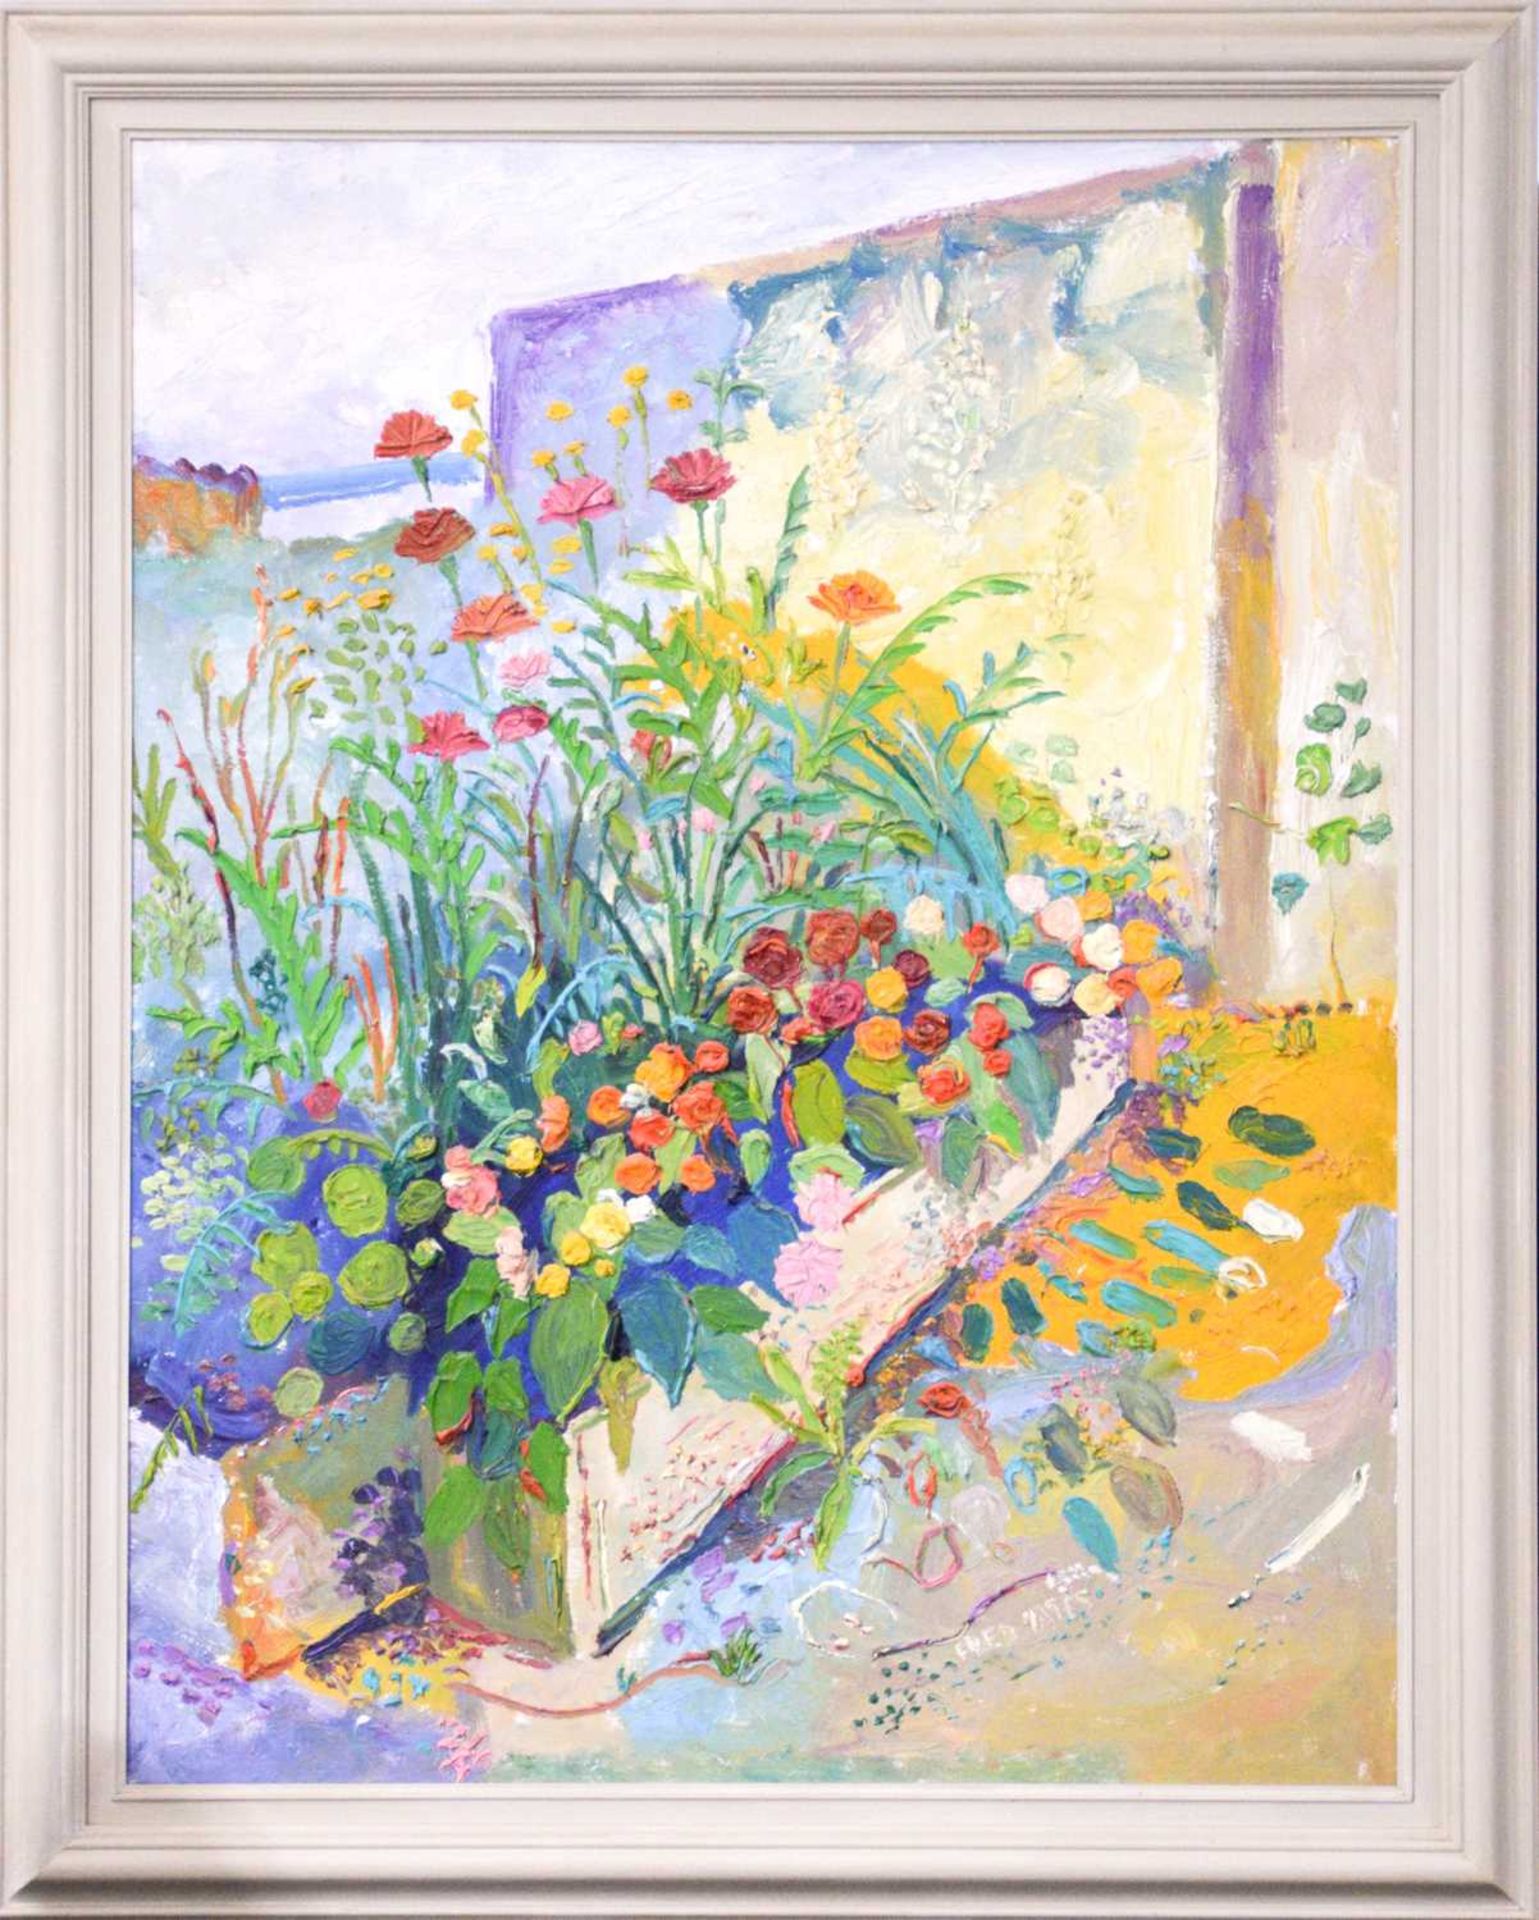 Fred Yates (1922 - 2008), 'My Garden in Rancon', signed, oil on canvas, 115.5 x 89 cm, framed, frame